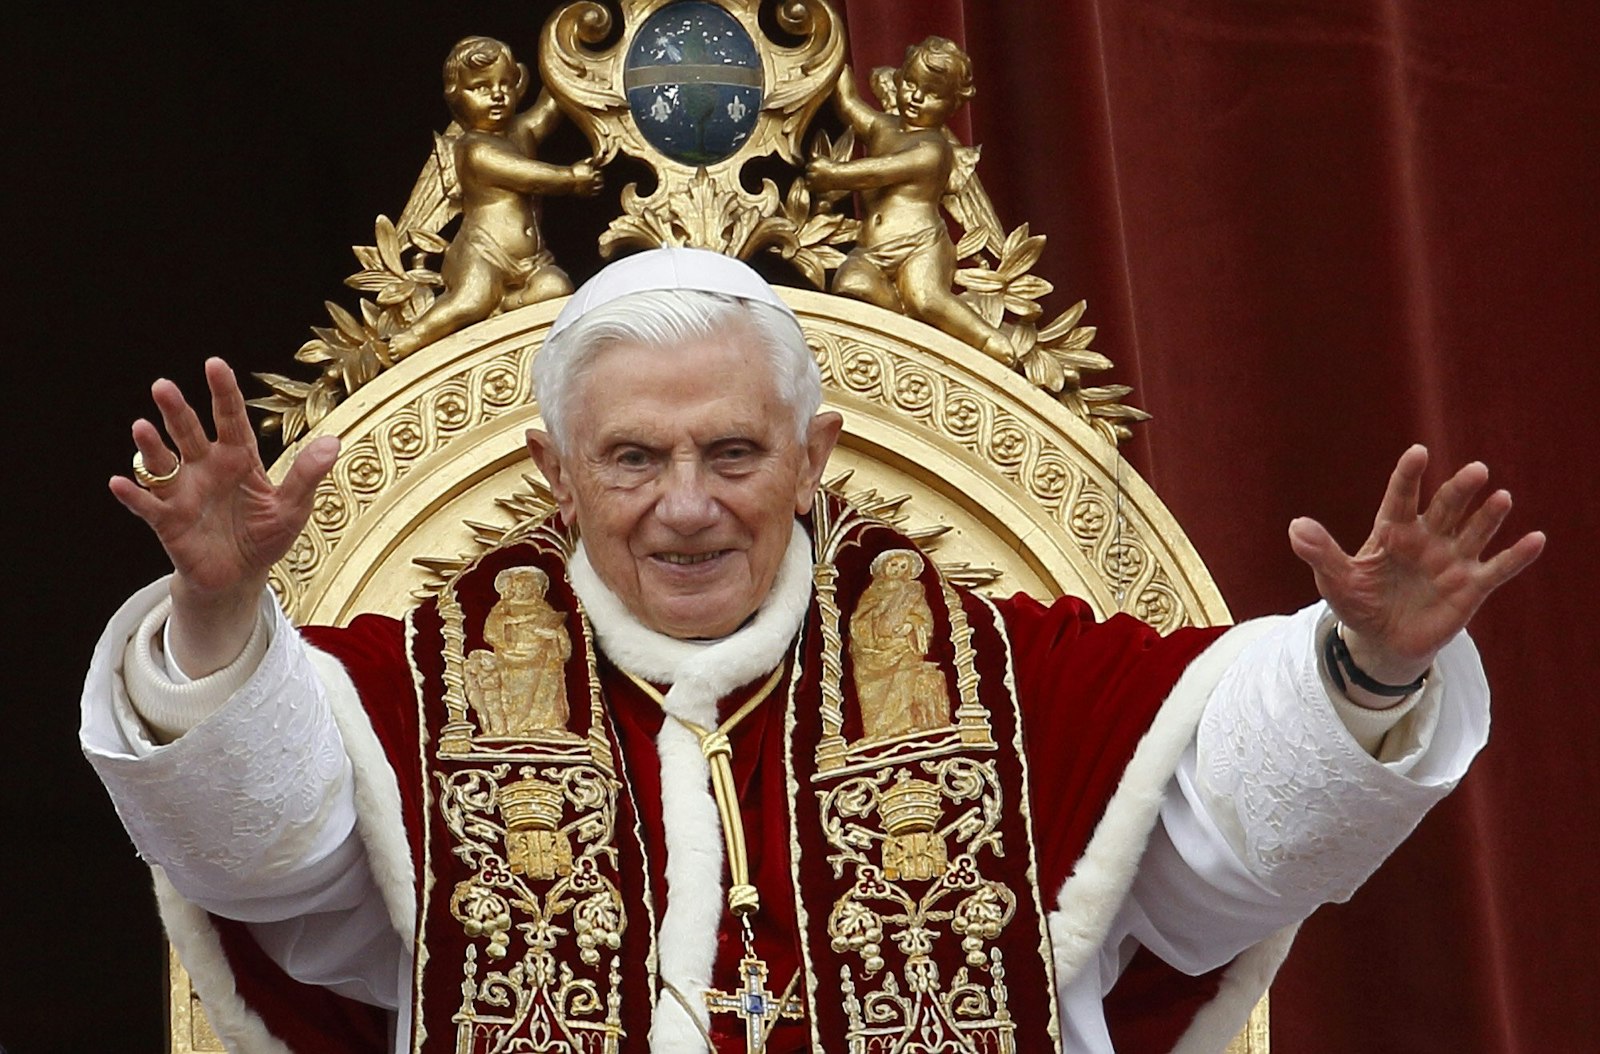 Pope Benedict XVI greets the crowd after delivering his Christmas message "urbi et orbi" (to the city and the world) from the central balcony of St. Peter's Basilica at the Vatican Dec. 25, 2012. (CNS photo/Paul Haring)